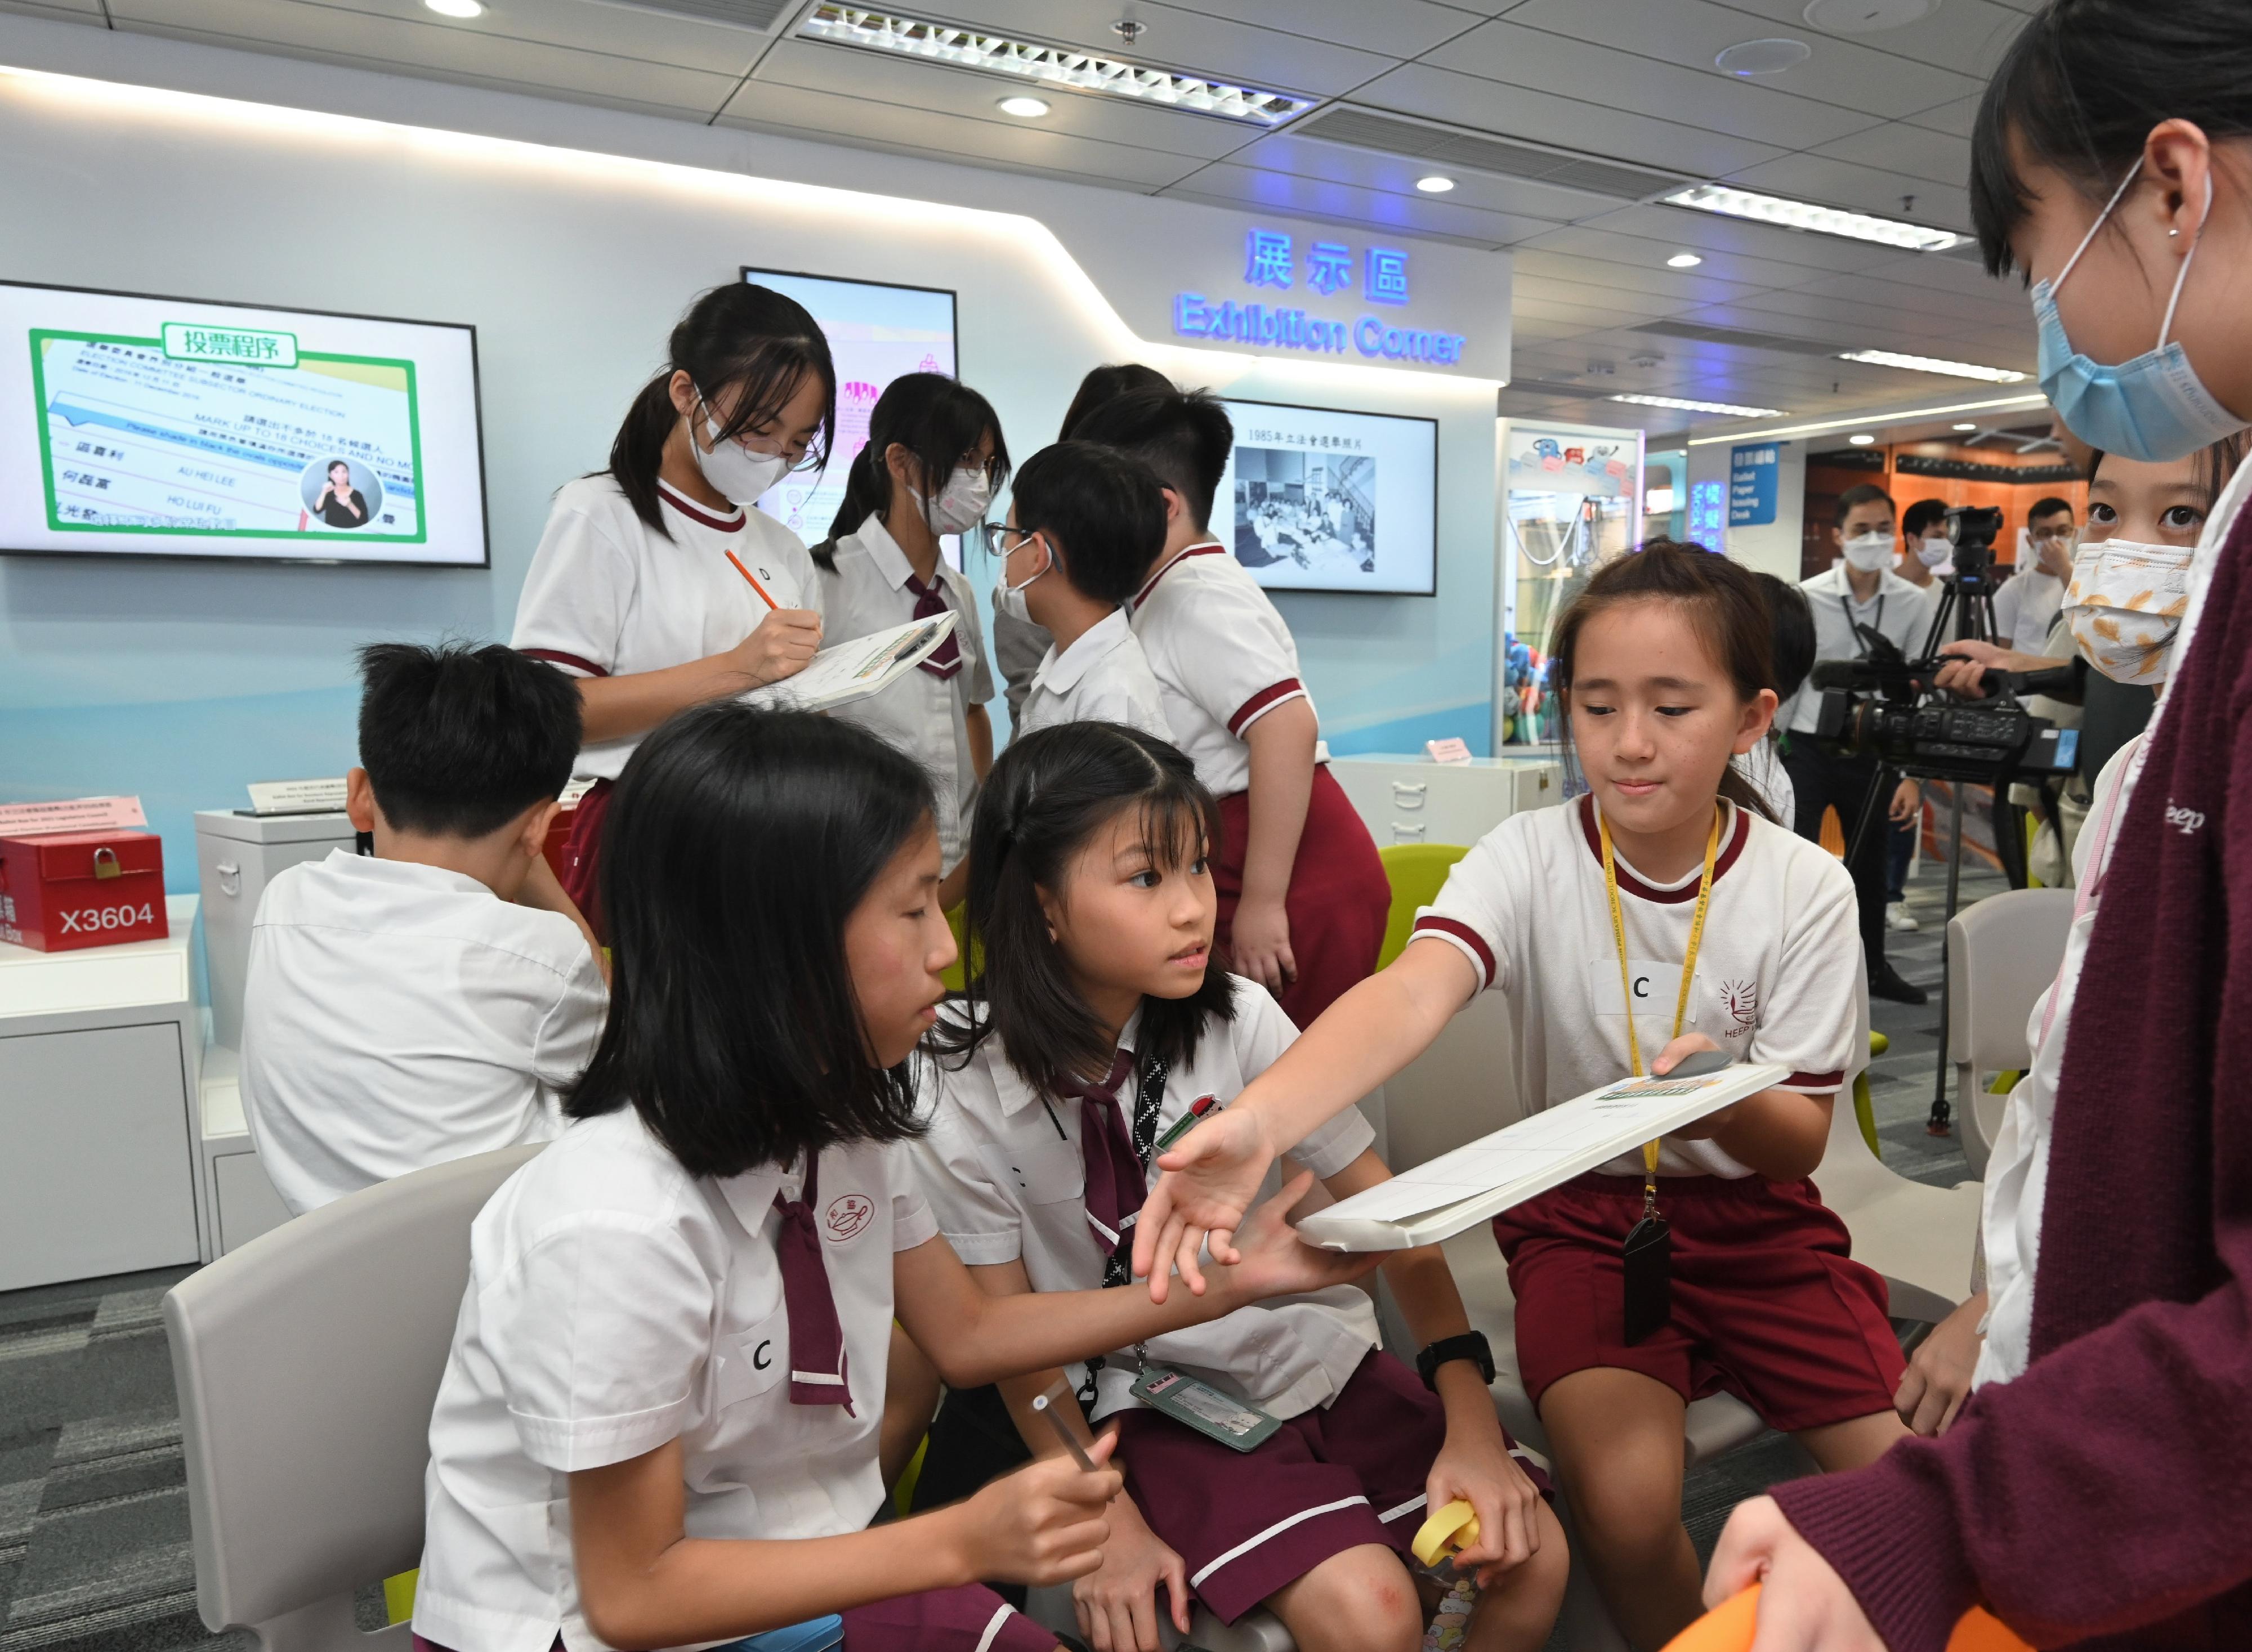 The brand new Electoral Information Centre (EIC) of the Registration and Electoral Office today (October 24) officially came into operation with a new look at the new site located at the Treasury Building, Cheung Sha Wan. Photo shows students participating in a group game during their visit at the new EIC today.